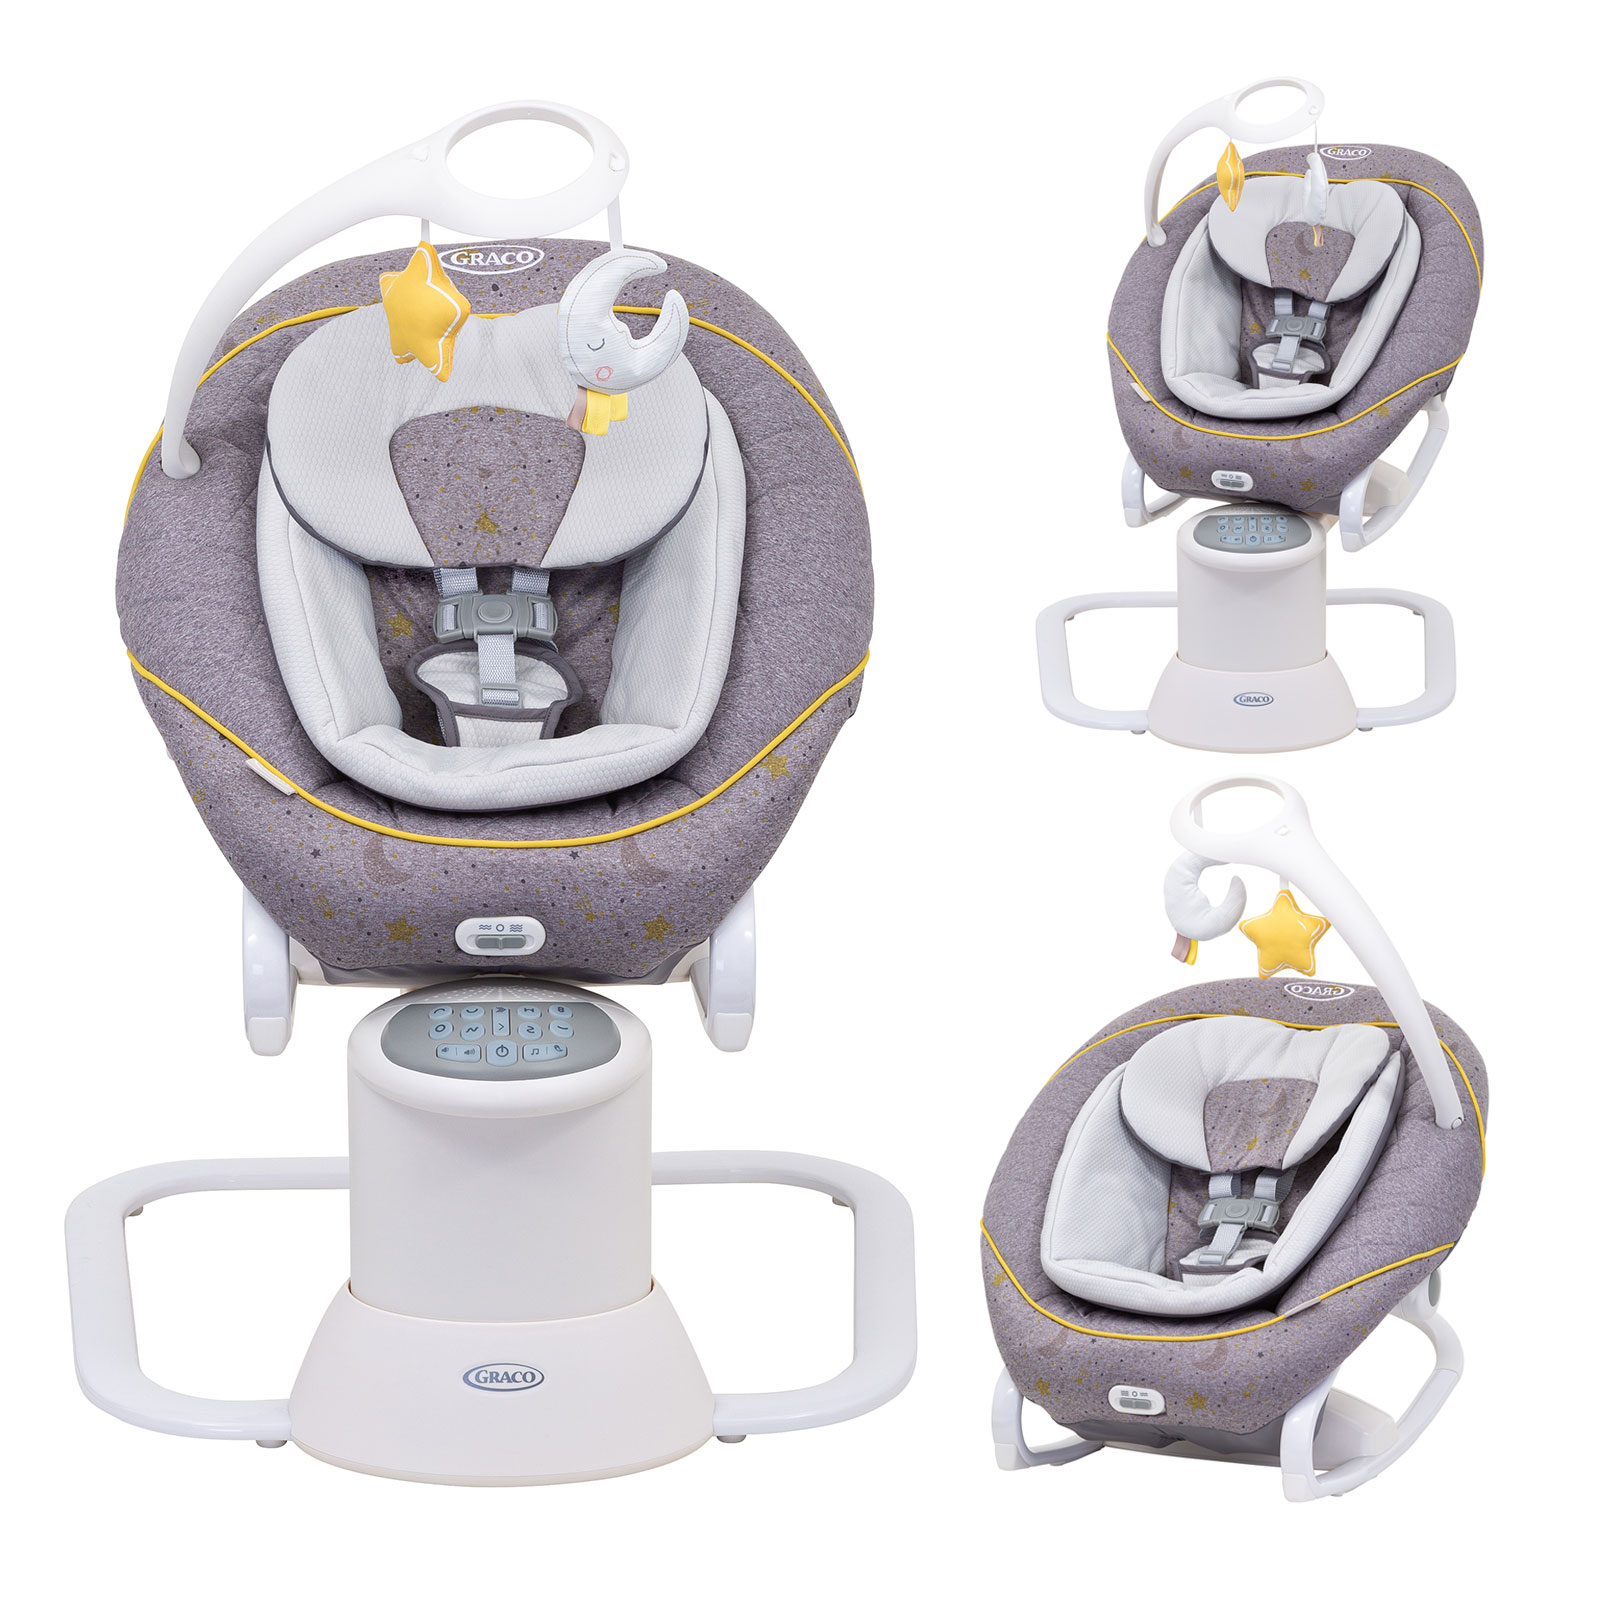 Graco All Ways Soother 2in1 Swing / Rocker with Vibration & Musical Sounds  – Stargazer Grey | Buy at Online4baby